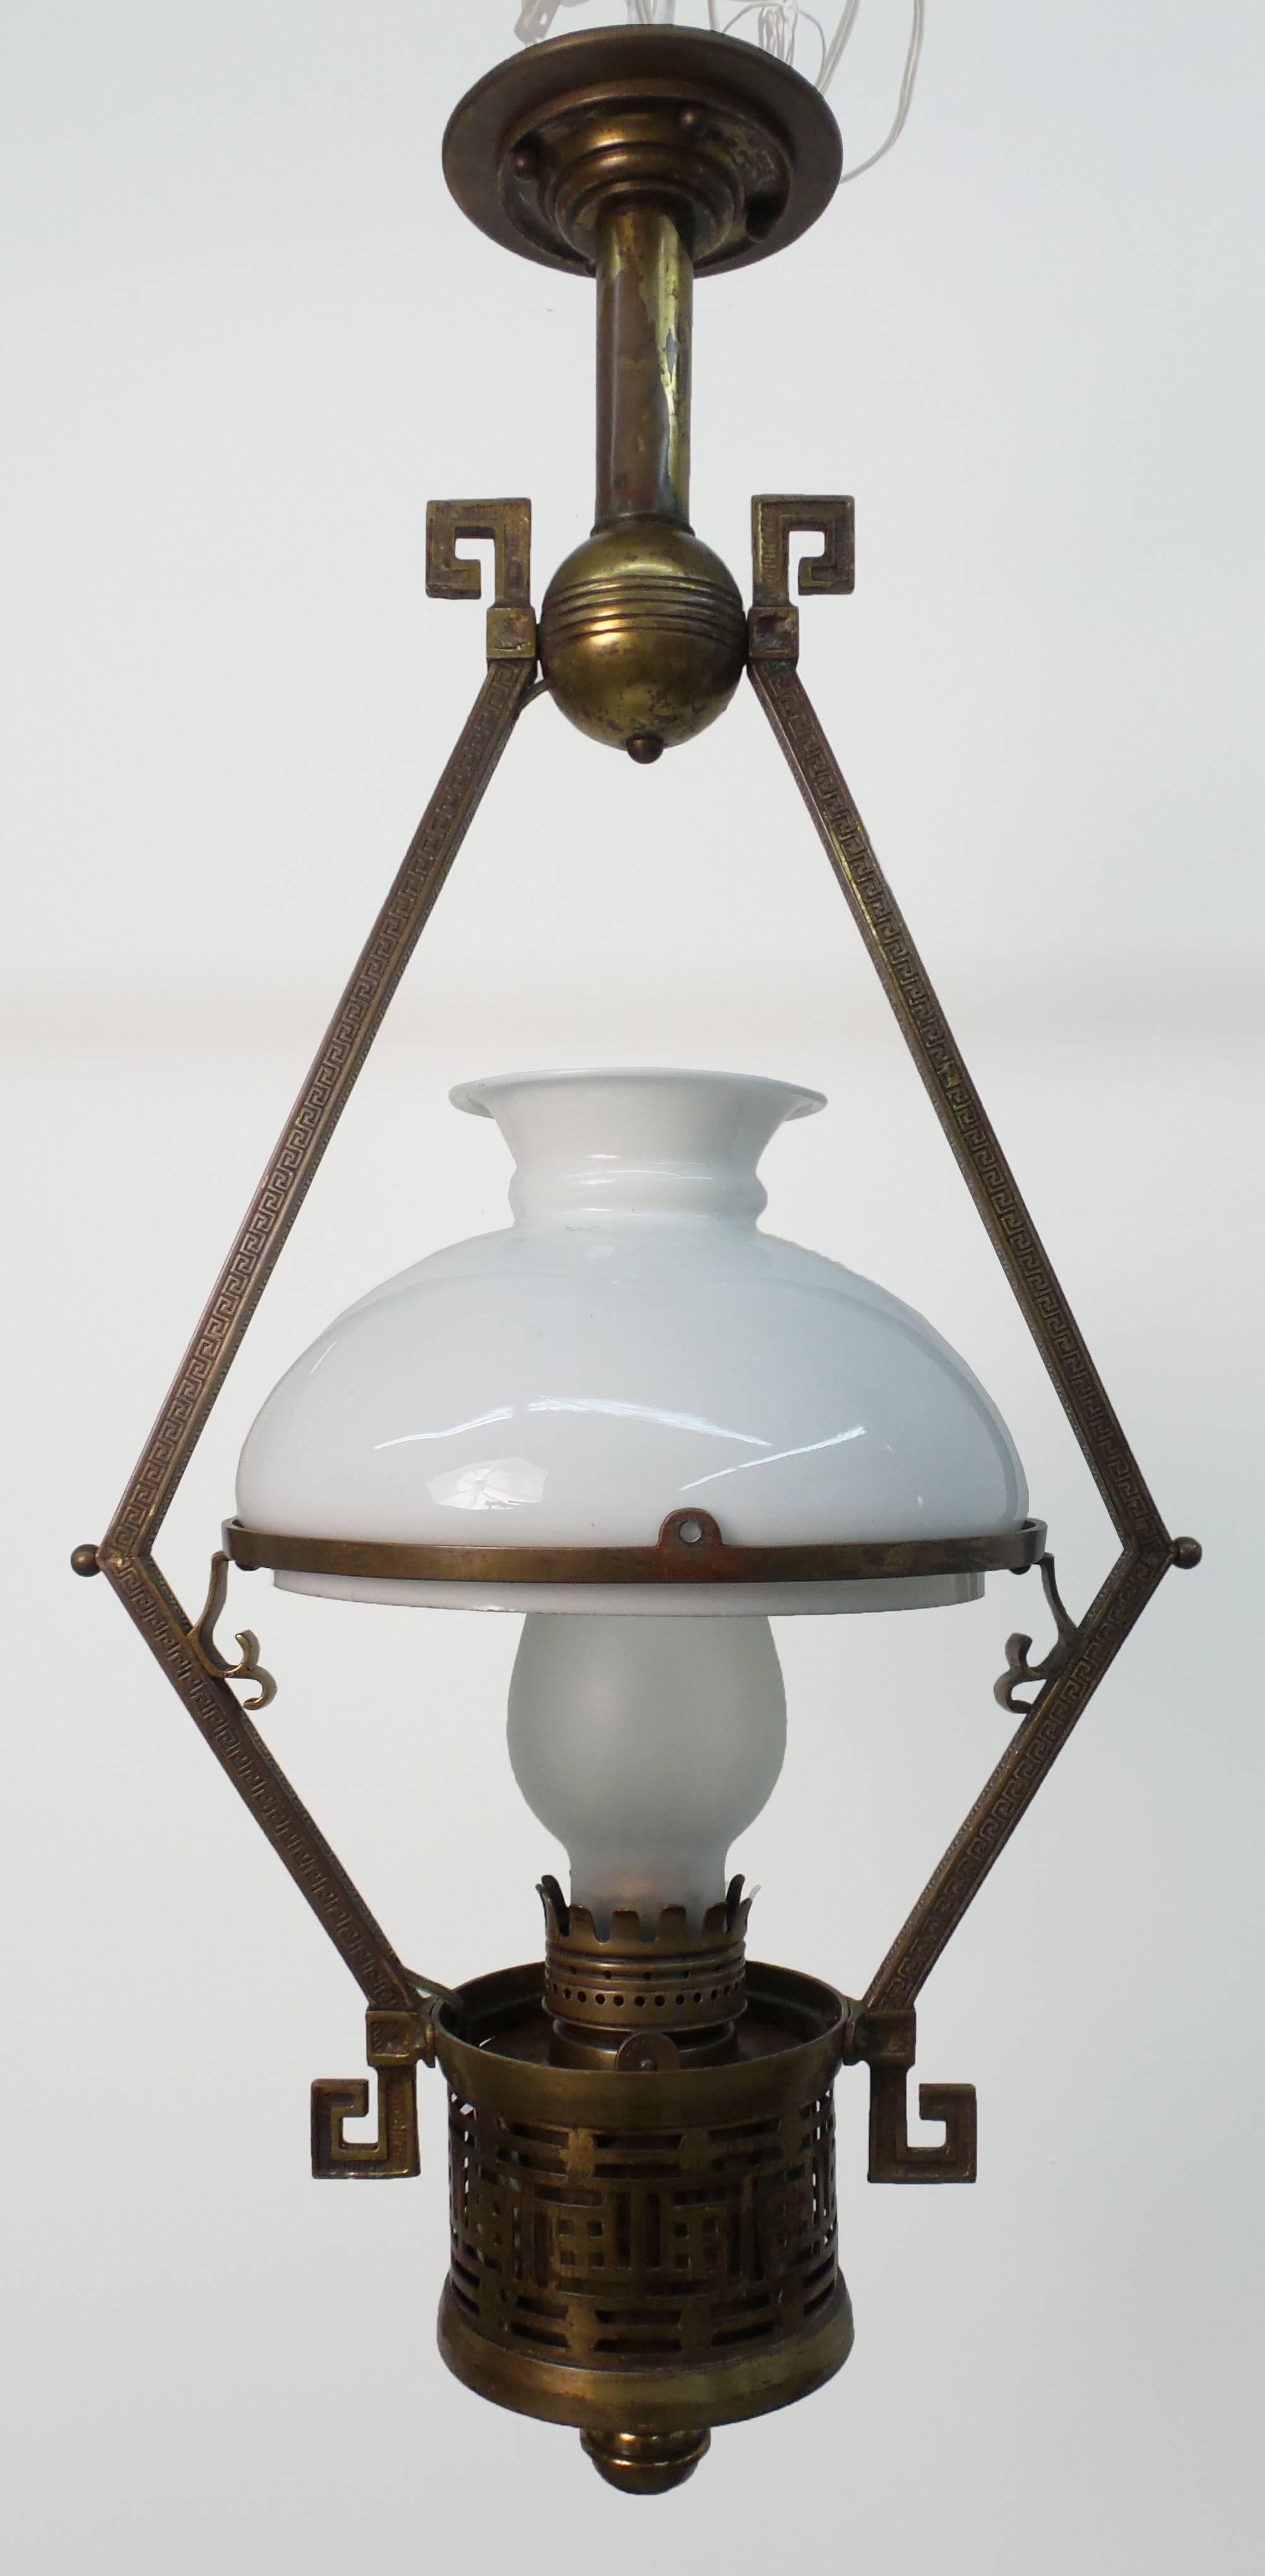 An English aesthetic period oil lamp executed in brass with Greek key and fretwork designs, circa 1885. Converted to electricity.